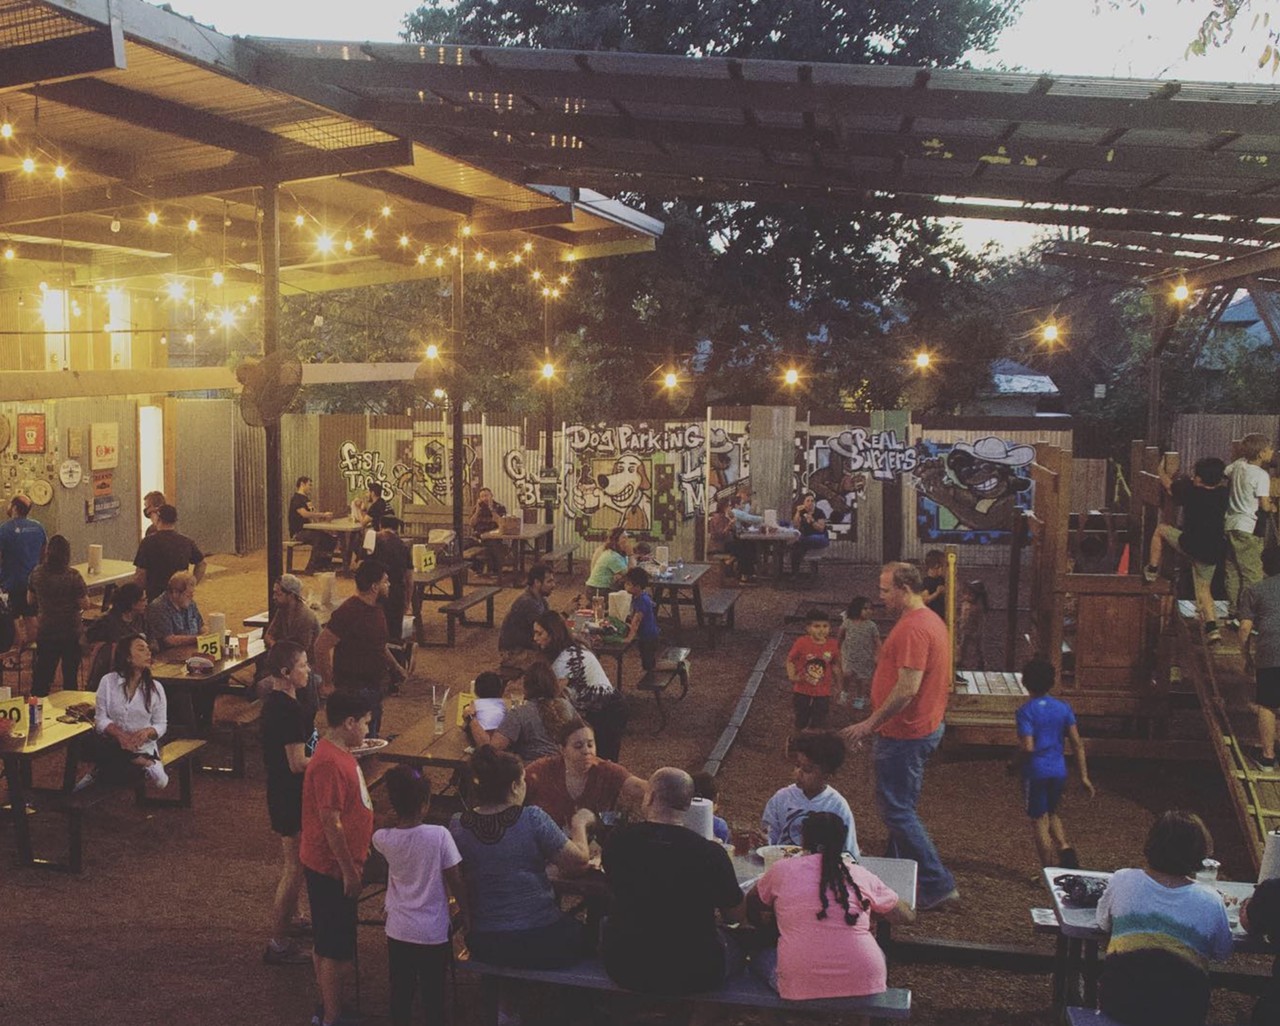 Best Family-Friendly Restaurant
The Cove, 606 W. Cypress St., (210) 227-2683, thecove.us
Photo via Instagram / thecovesa